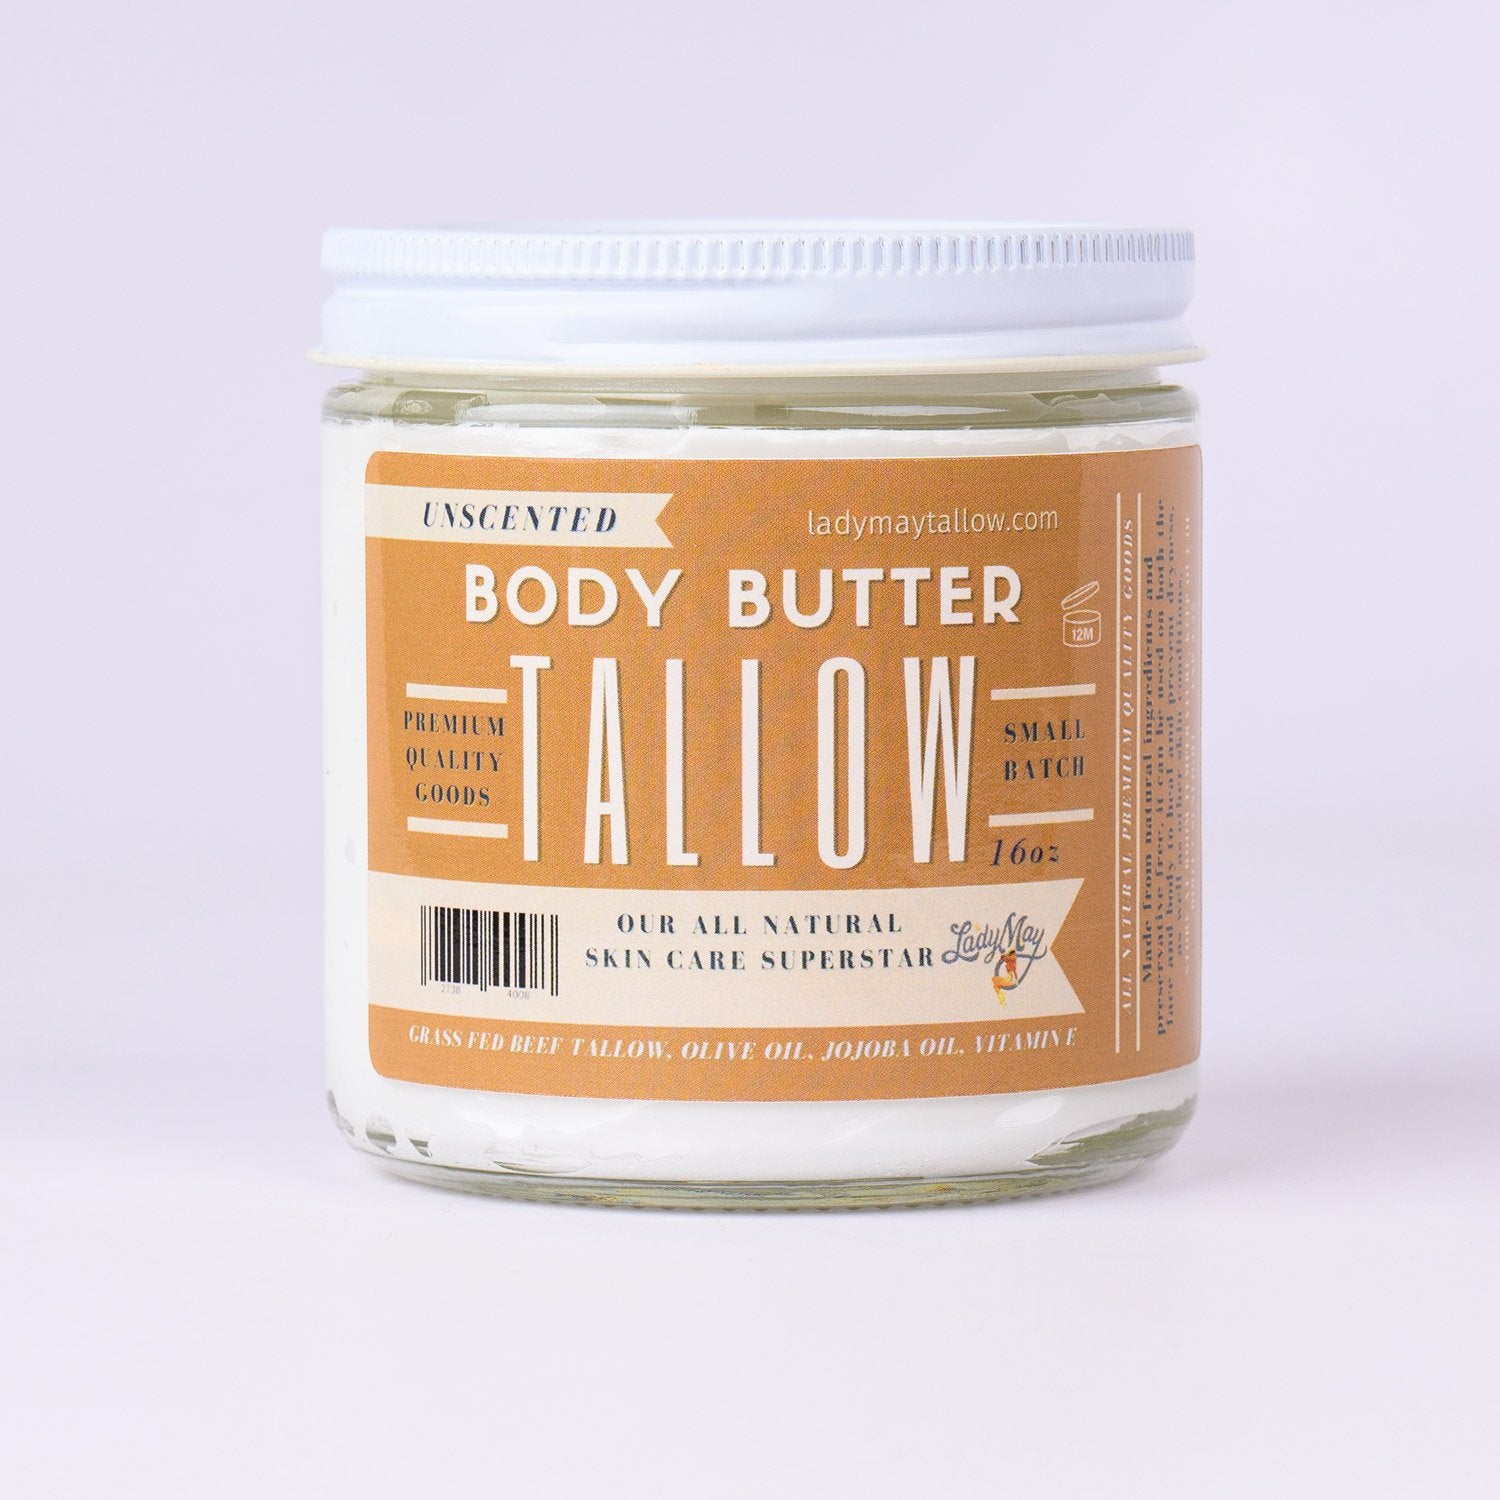 Versatile Use Lady May Whipped Tallow isn’t just a moisturizer; it’s a multi-purpose balm that can be used from head to toe. Use it as a lip balm, cuticle cream, or even to tame flyaway hairs. Its versatility is part of what makes it so beloved.